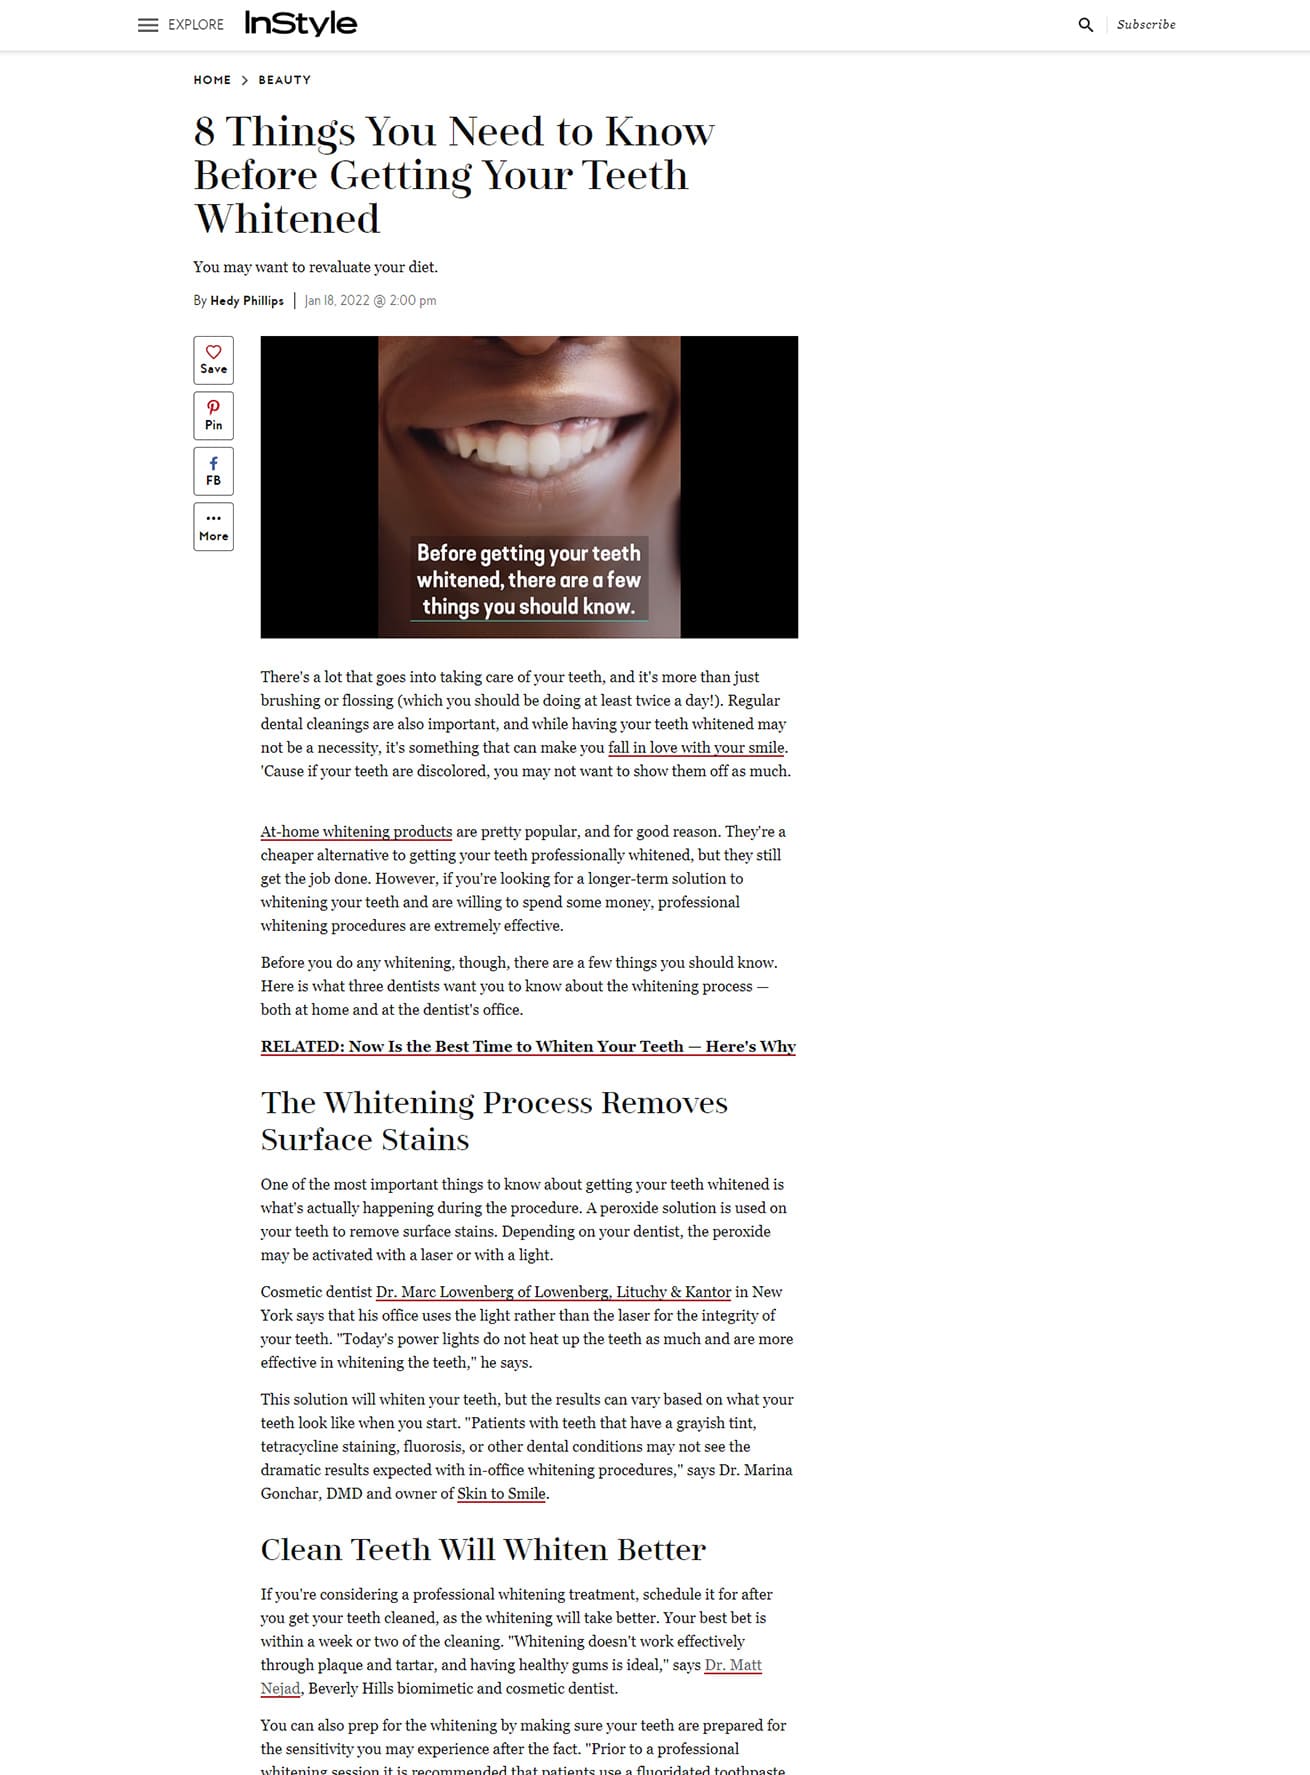 Screenshot of an article titled: 8 Things You Need to Know Before Getting Your Teeth Whitened